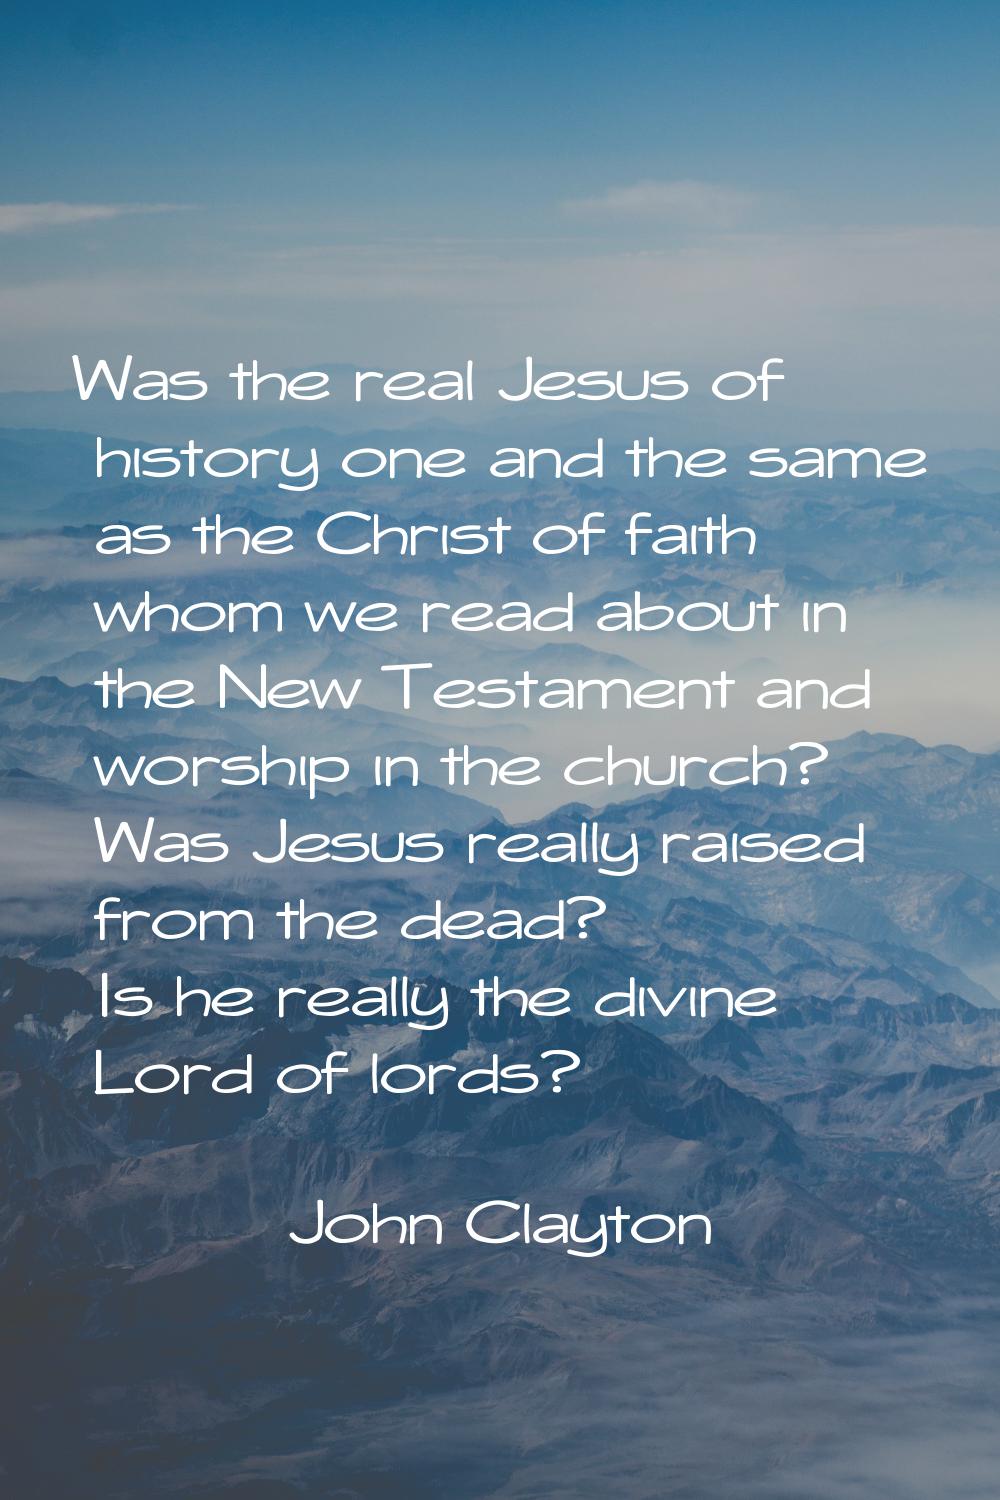 Was the real Jesus of history one and the same as the Christ of faith whom we read about in the New